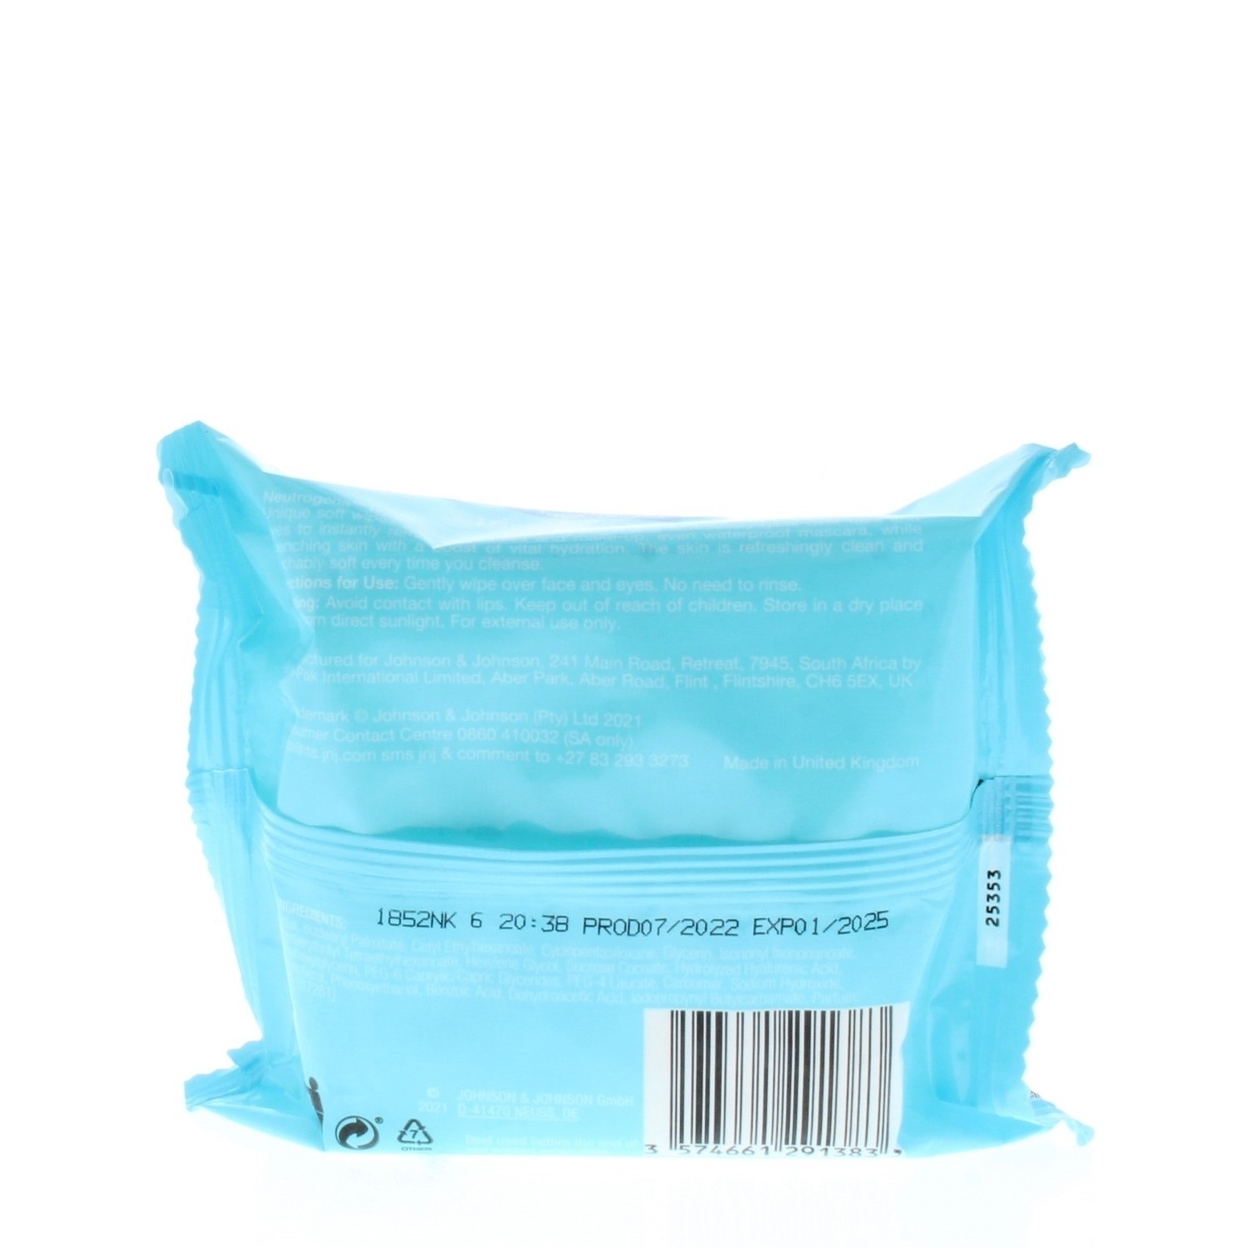 Neutrogena Hydro Boost Cleanser Facial Wipes (25 Wipes)